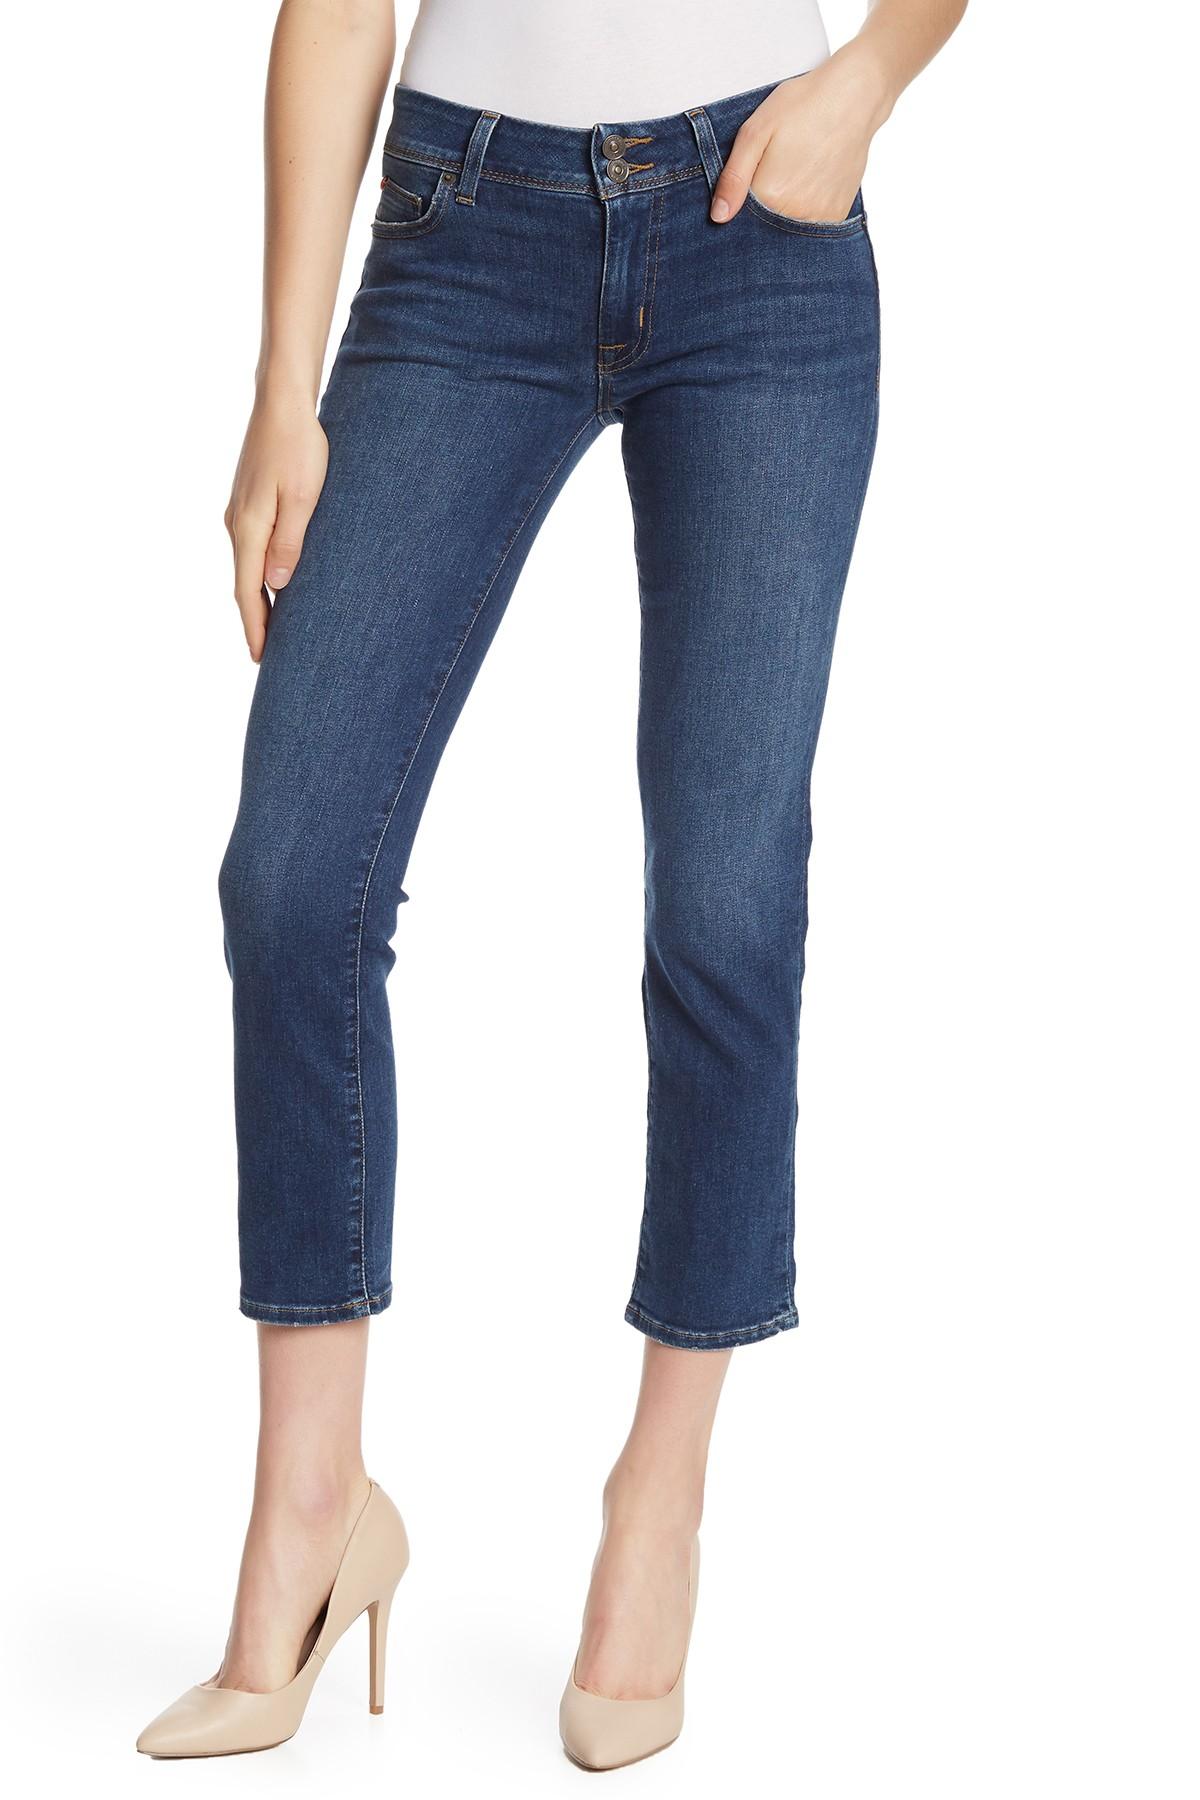 Hudson Jeans Ginny Cropped Straight Leg Jeans in Blue - Lyst